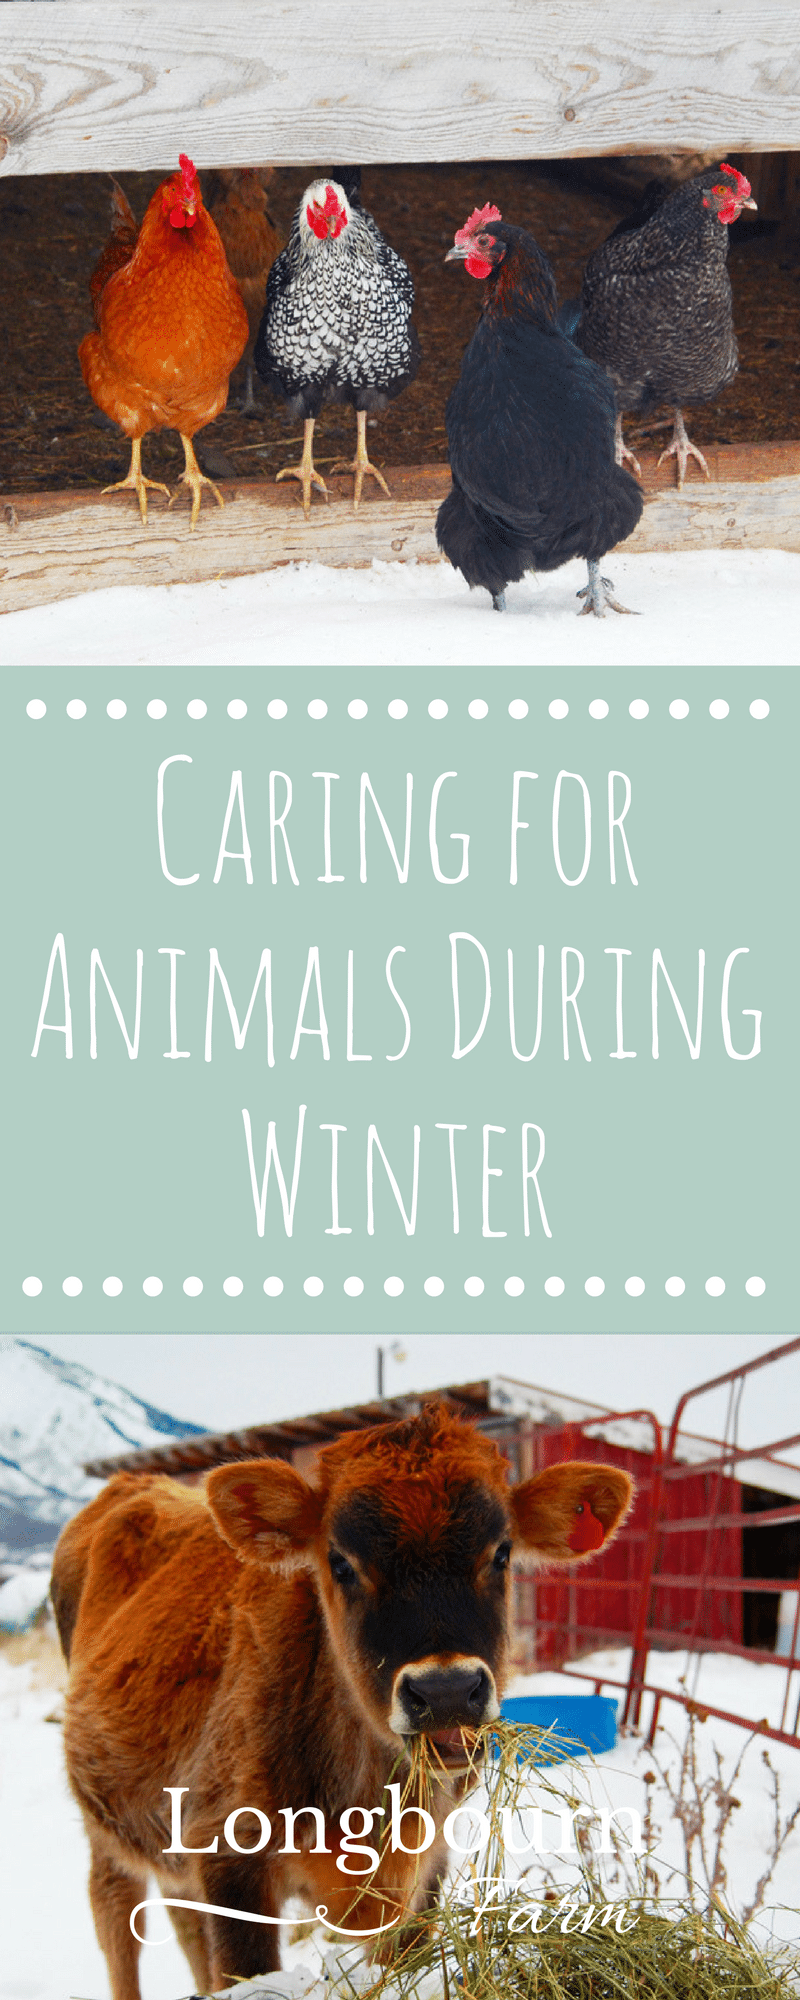 Caring for Animals During Winter takes a little more thought and effort, but it isn't hard. Read this post for tips on how to keep yours comfy this winter!